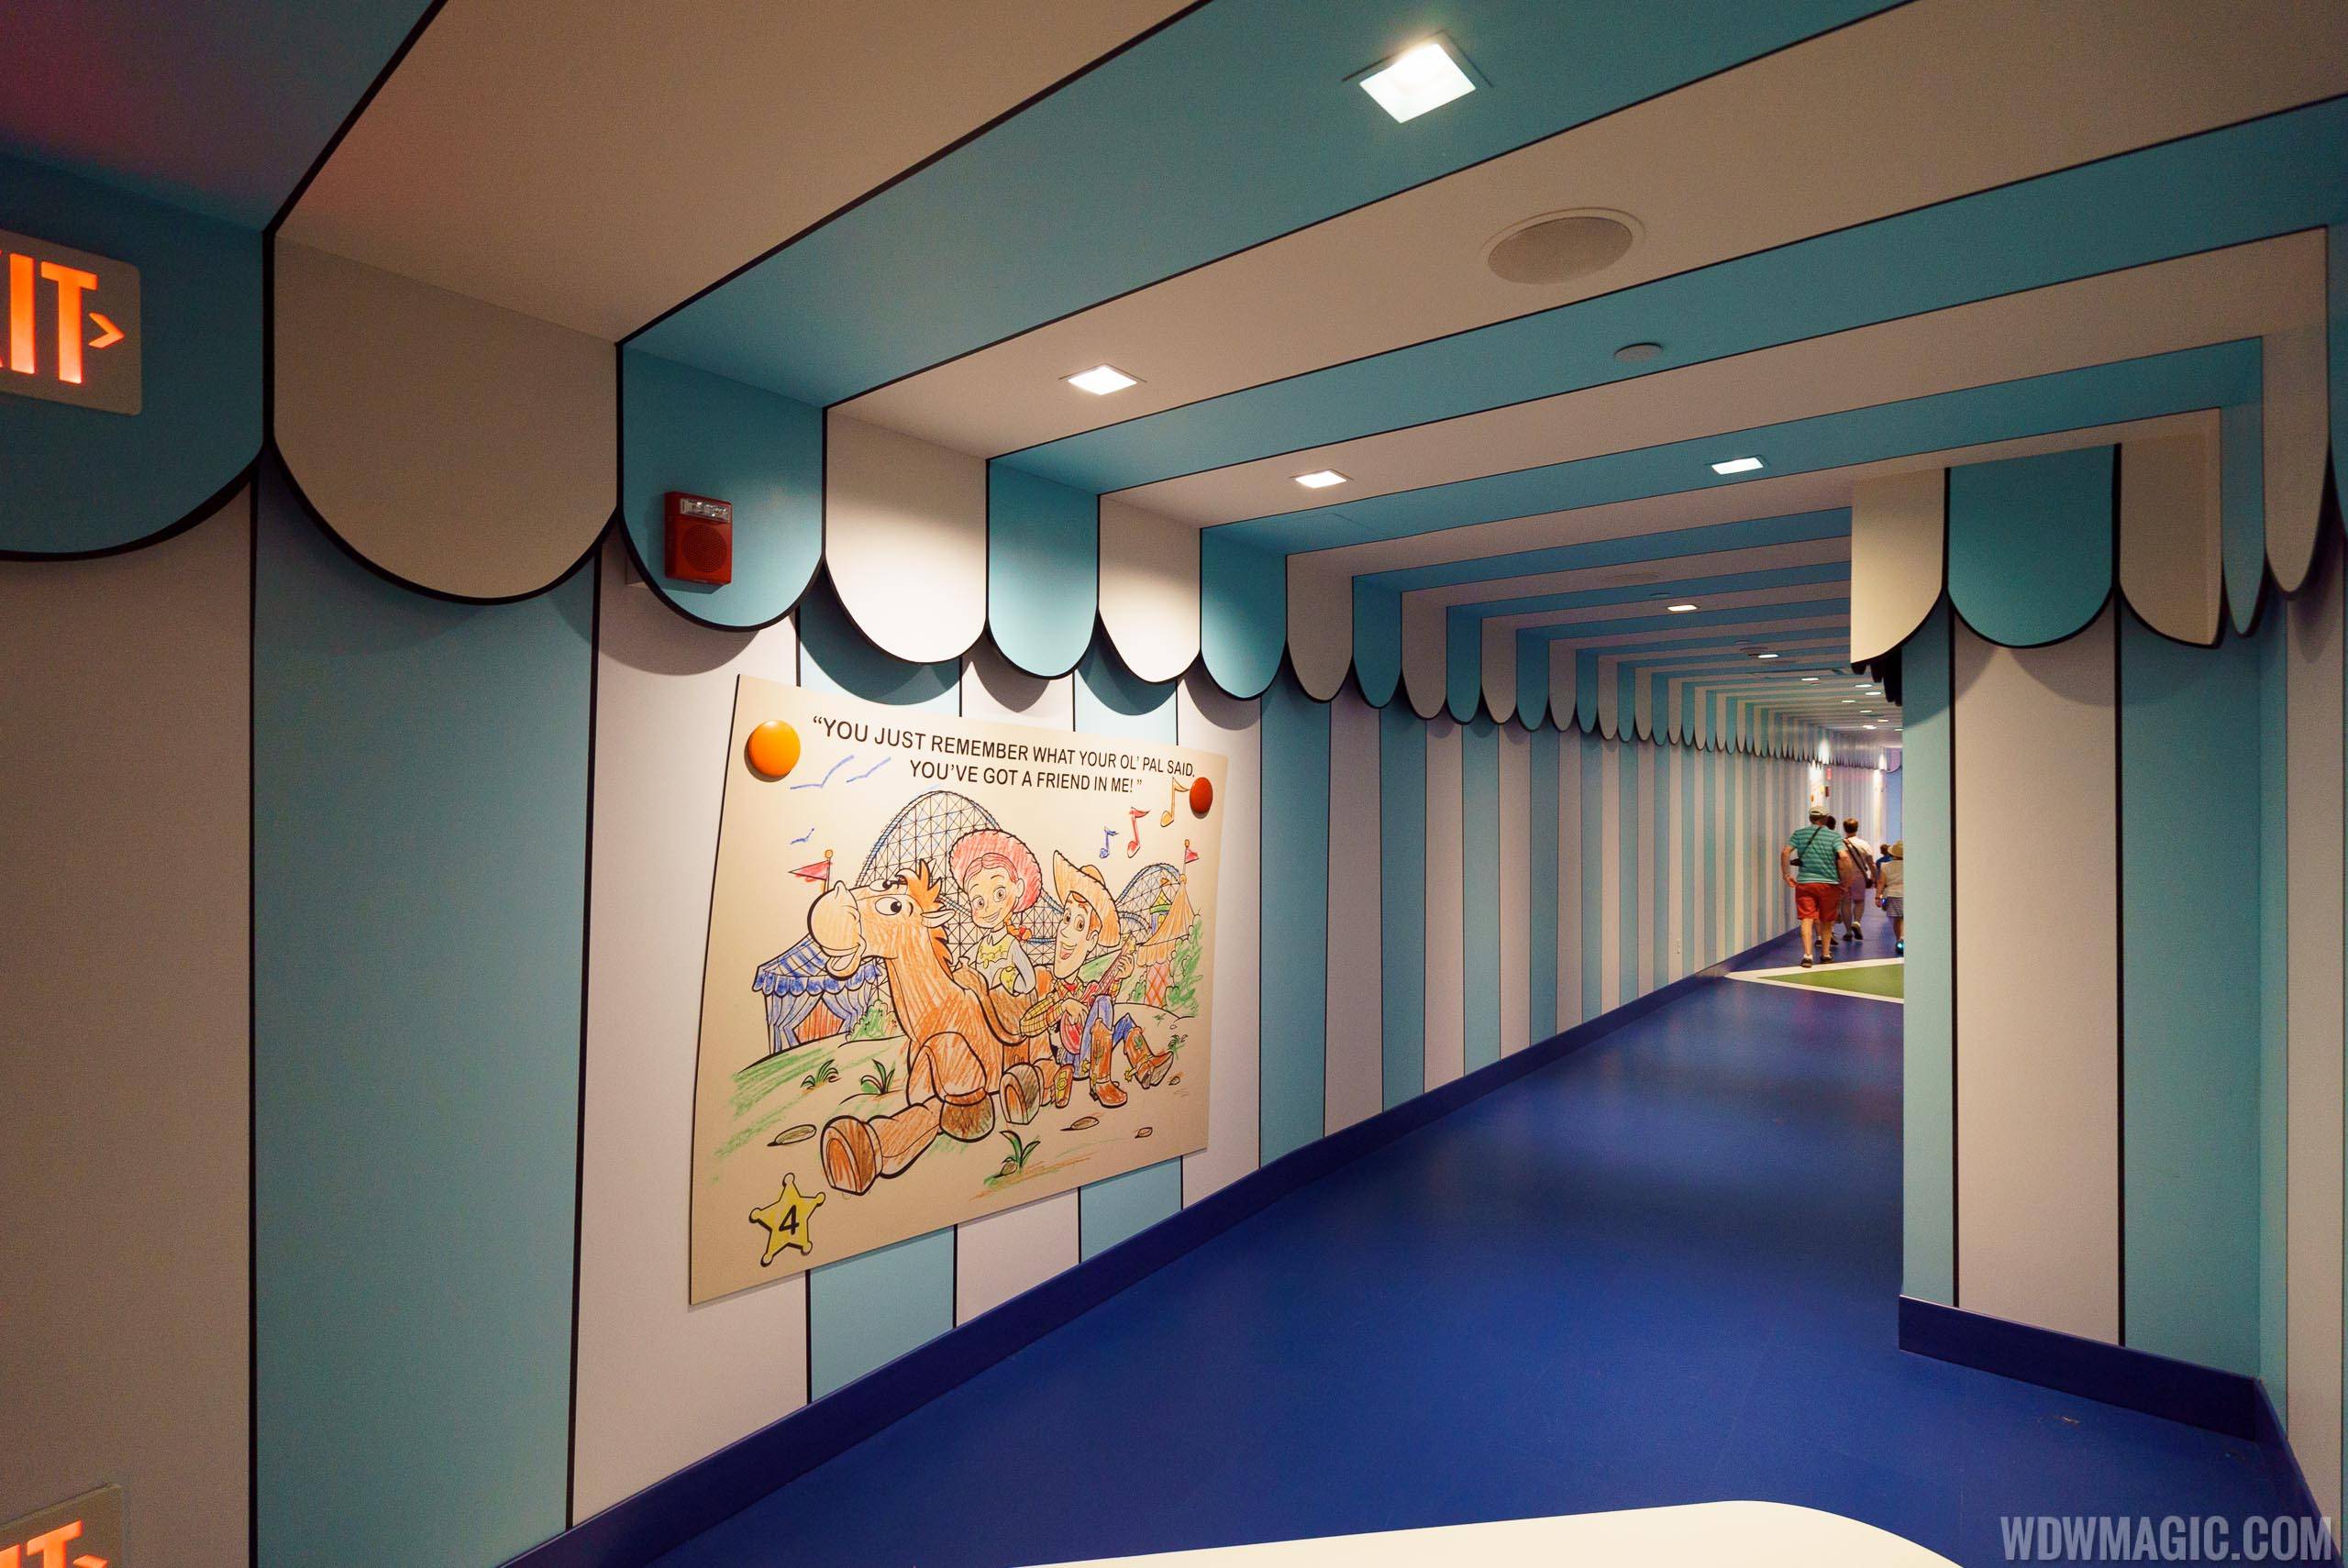 Third Track expansion at Toy Story Mania